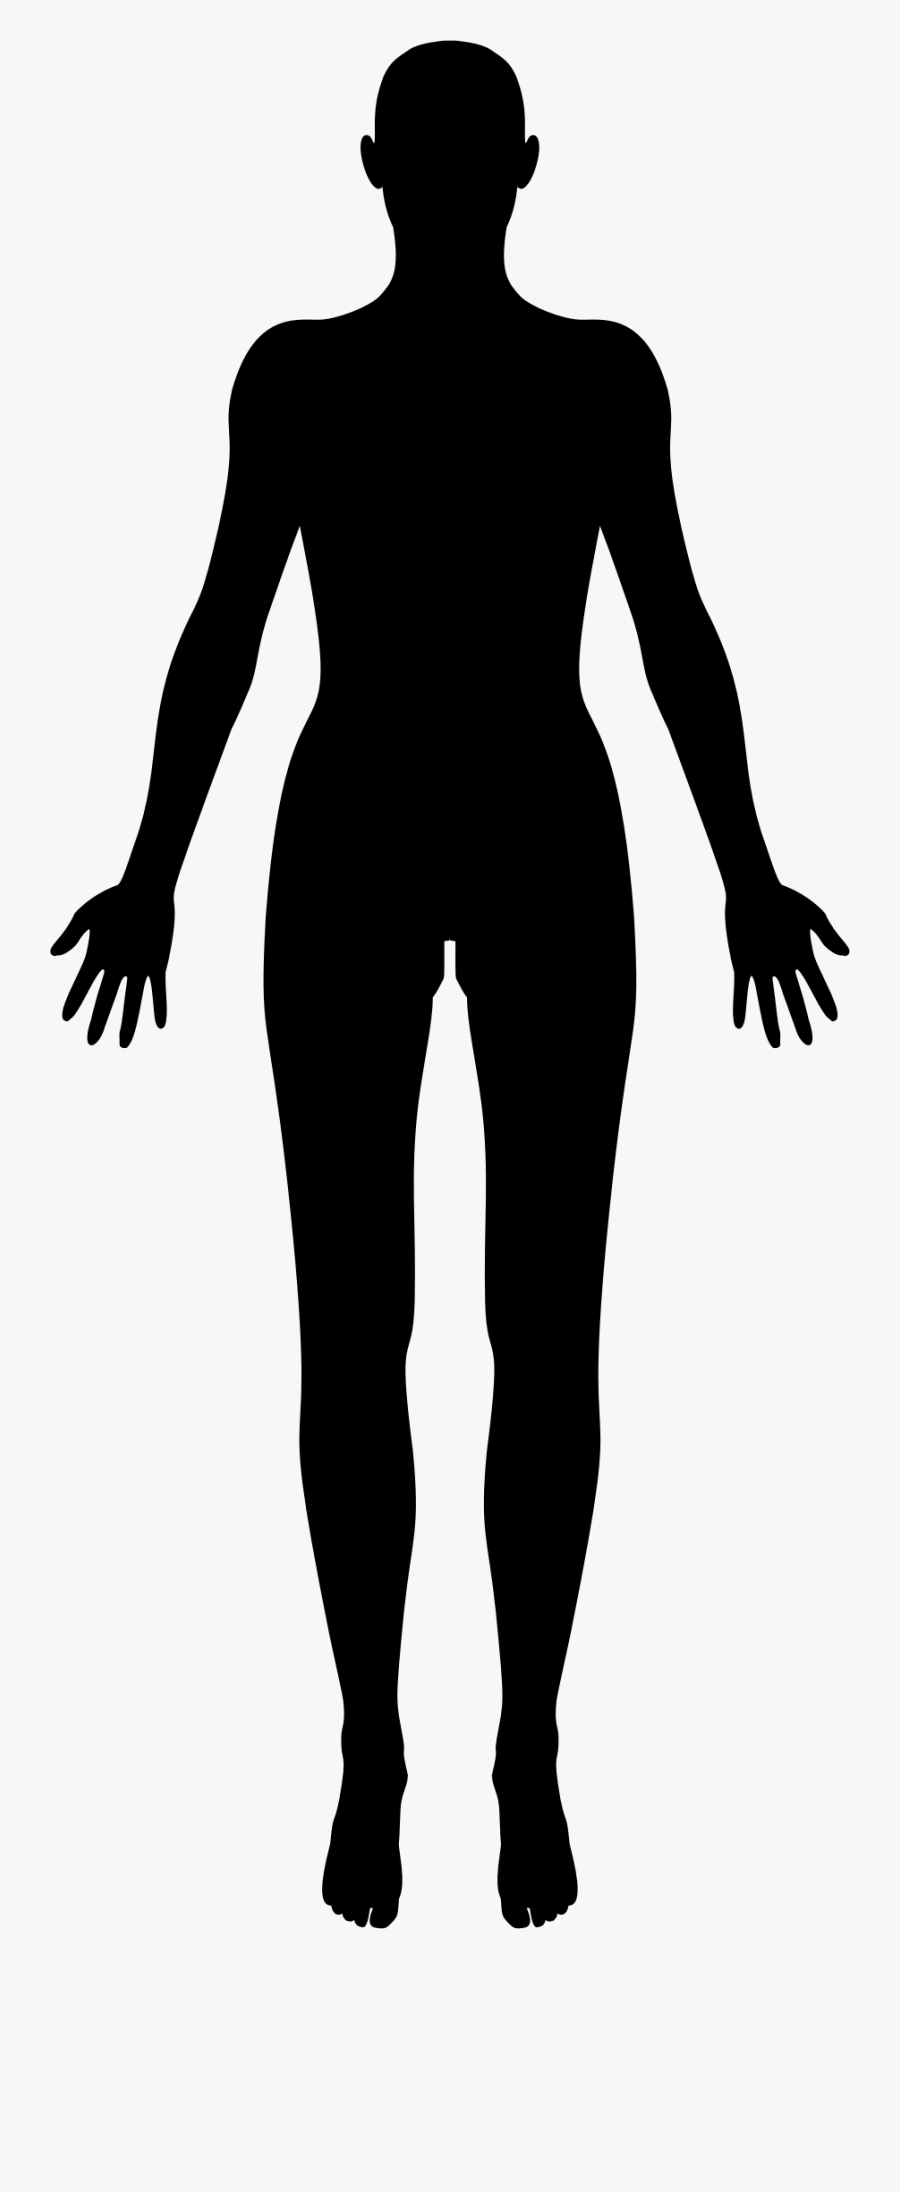 Clipart - Human Body Silhouette Png, Transparent Clipart